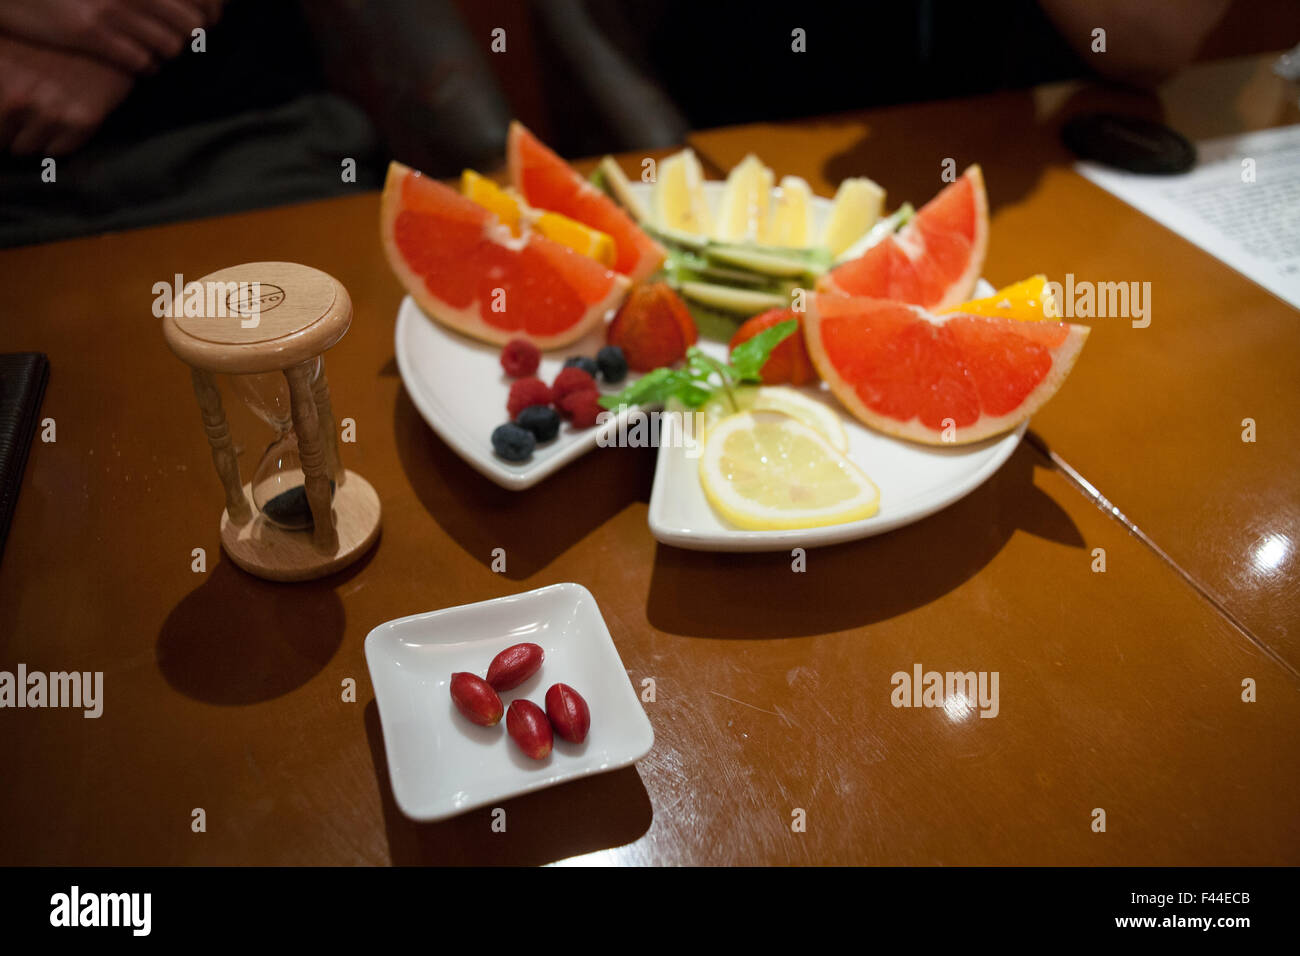 Miracle fruit with hour glass and citrus fruits viewed from above Stock Photo